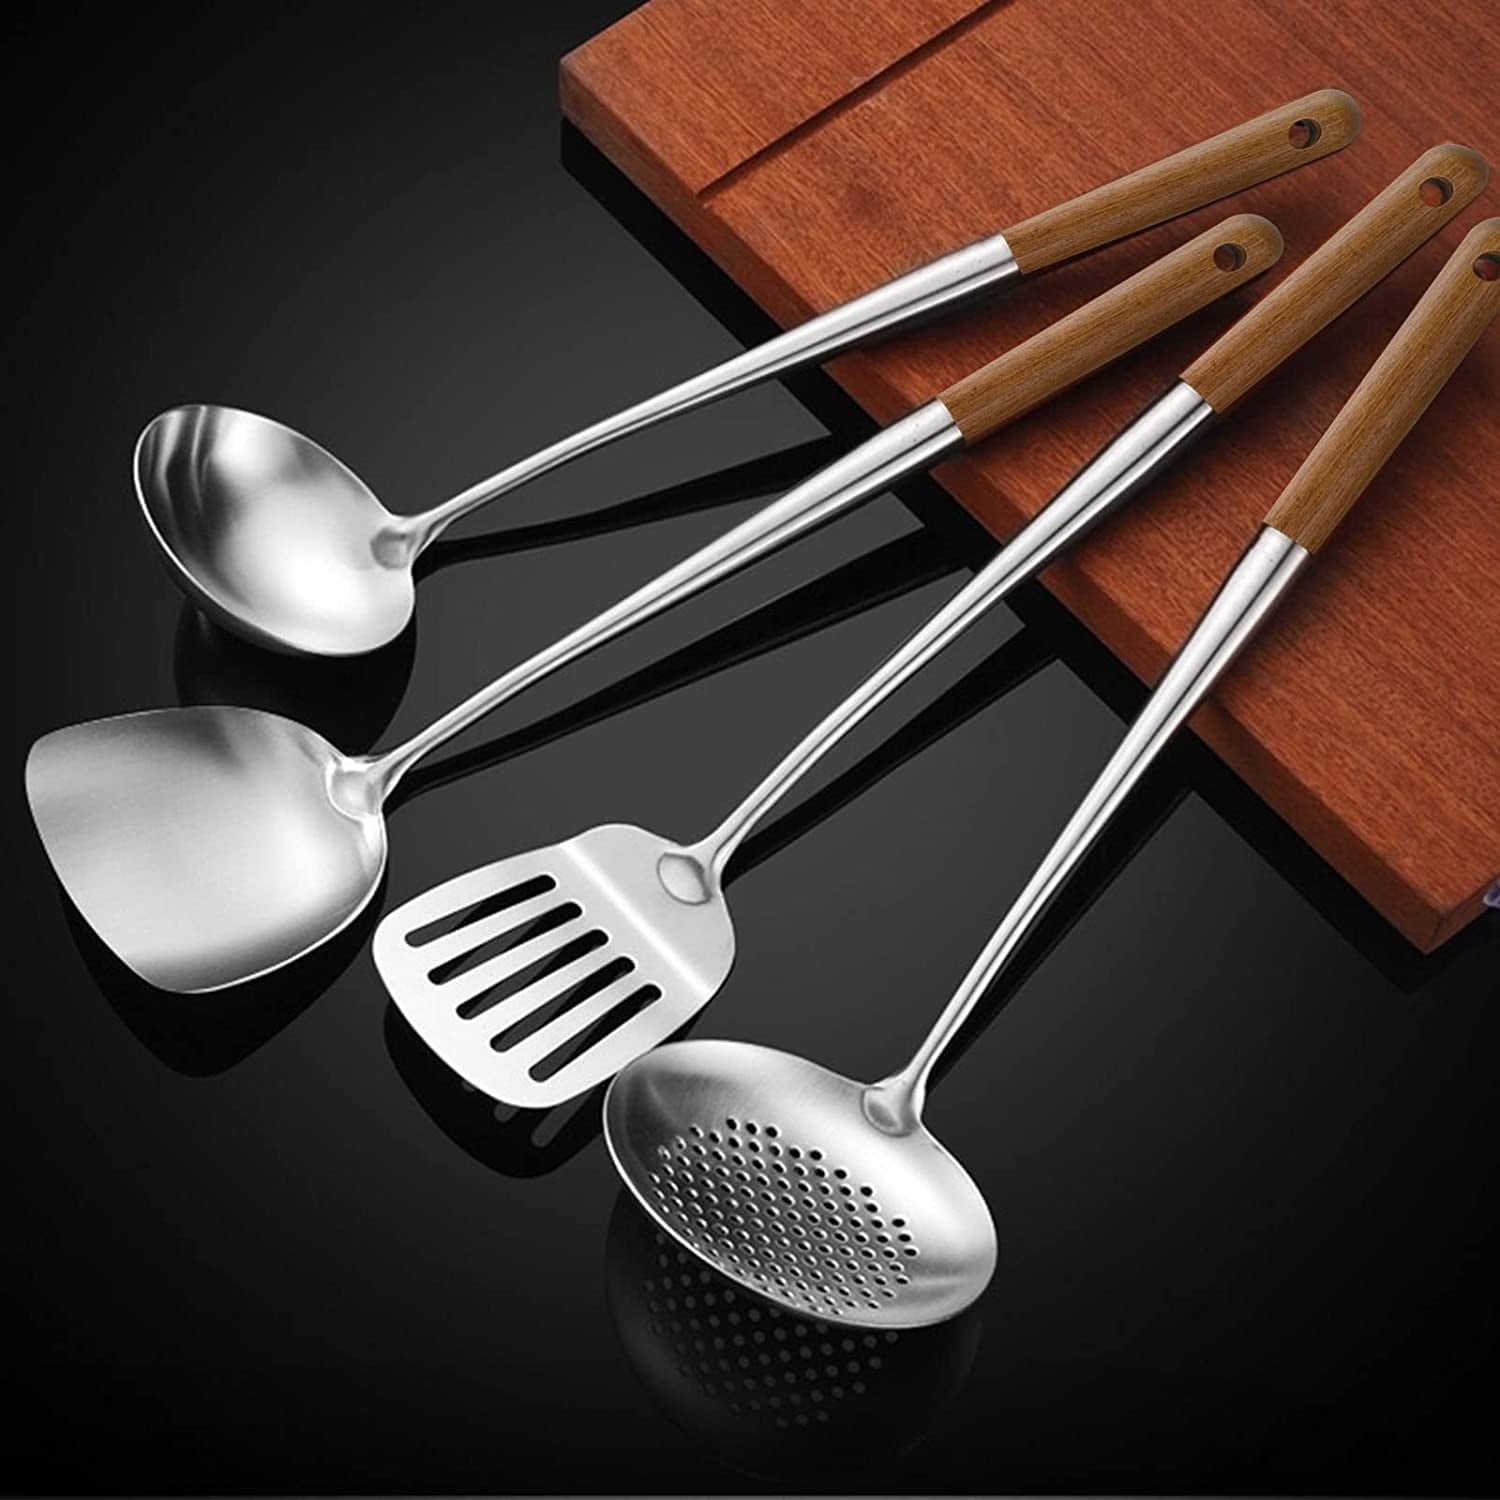 Town 33973 3 1/2 x 4 Small Wok Spatula with 16 1/2 Wood Handle